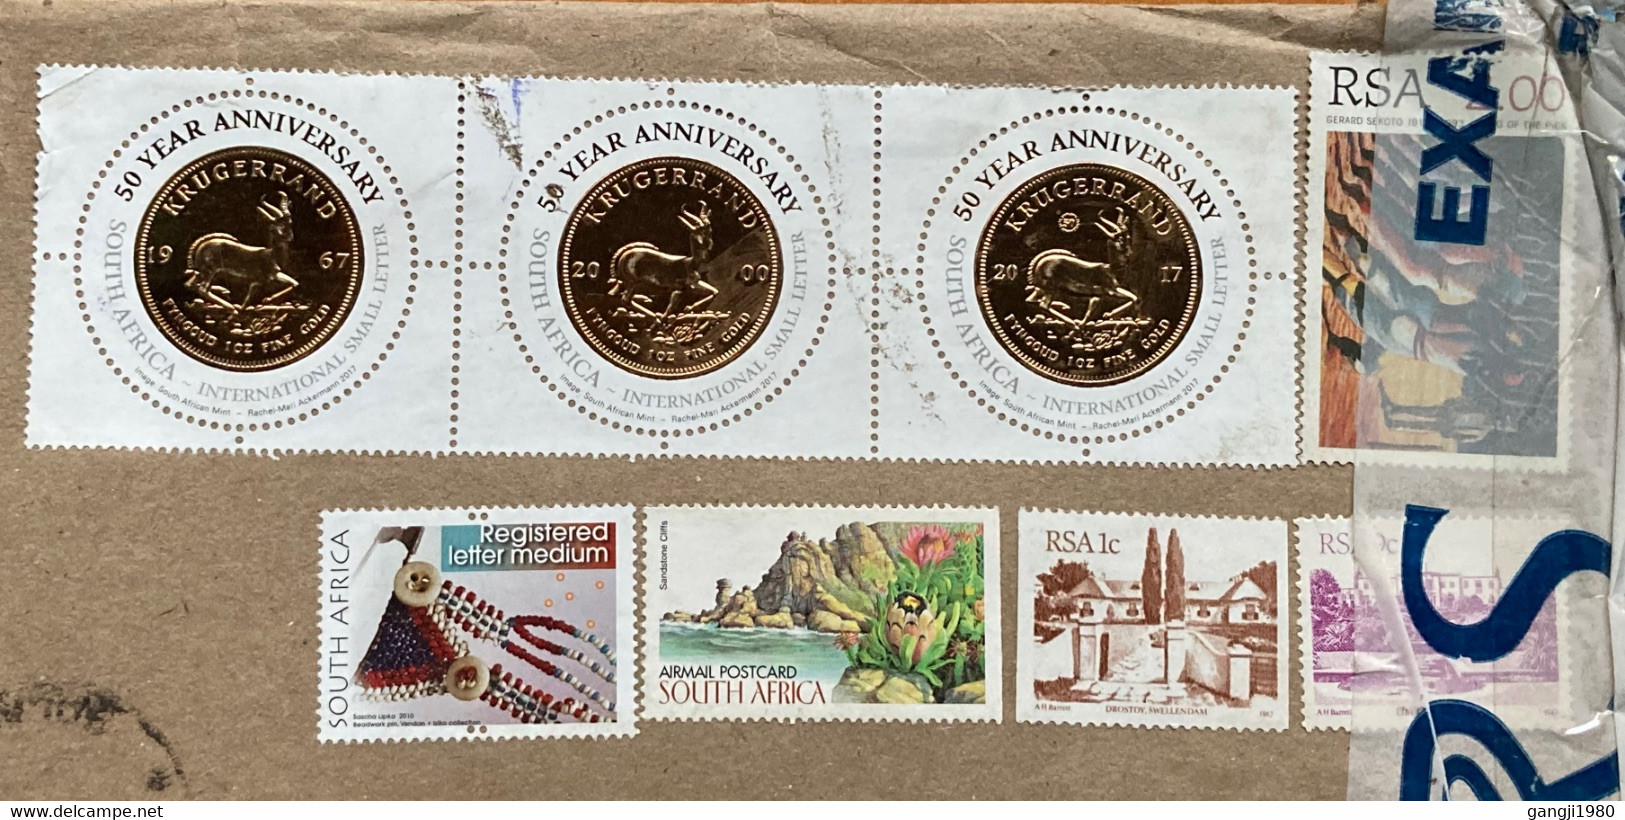 SOUTH AFRICA 2022, COVER USED TO INDIA,GOLD COIN 2017, ROUND STAMP, REGISTER STAMP, HANDICRAFT, SPECIAL POSTCARD STAMP - Covers & Documents